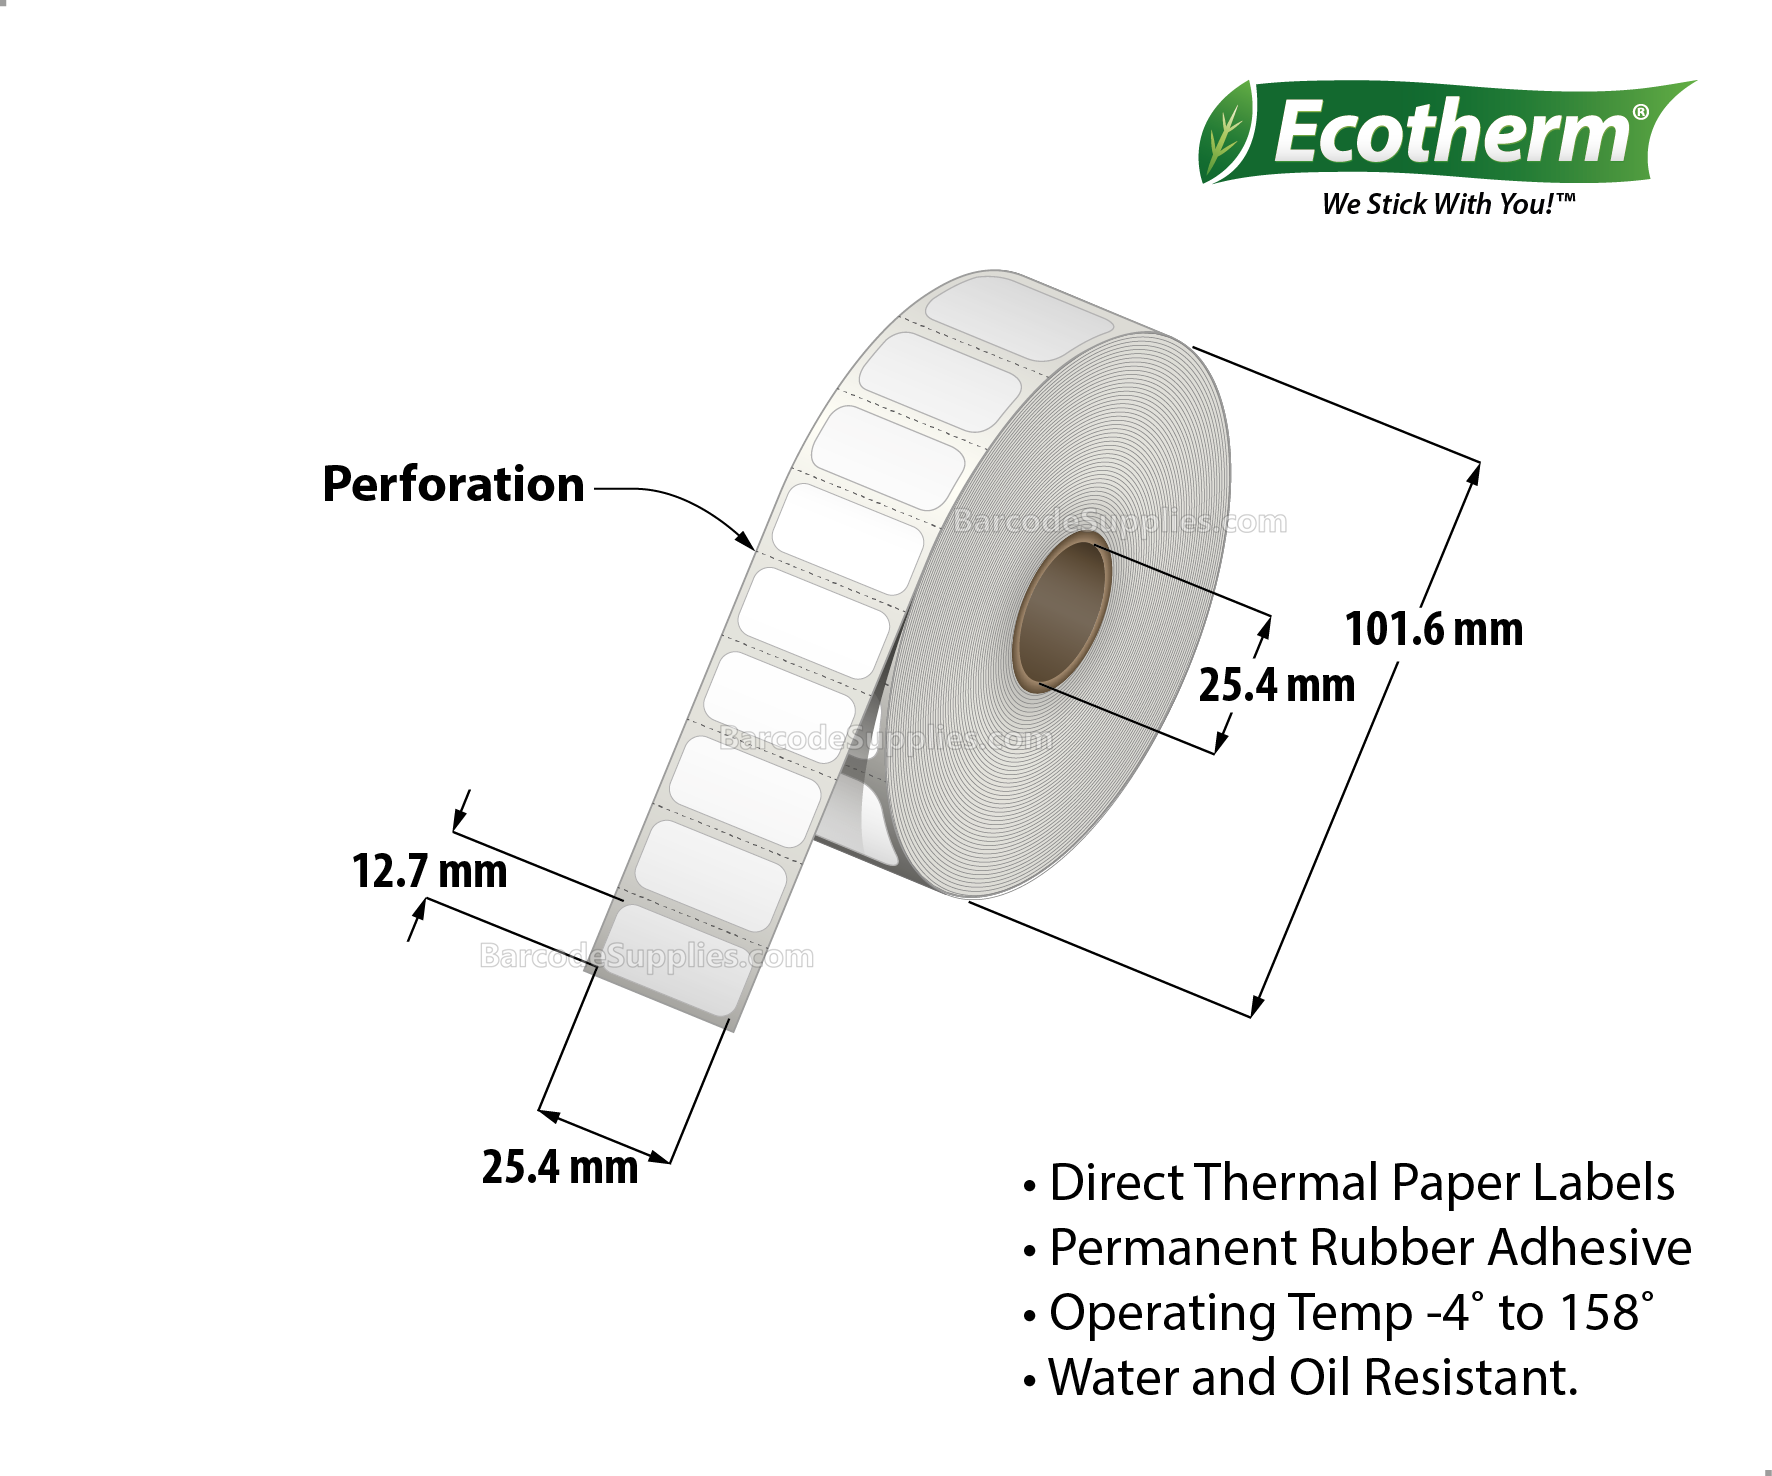 1 x 0.5 Direct Thermal White Labels With Rubber Adhesive - Perforated - 2450 Labels Per Roll - Carton Of 4 Rolls - 9800 Labels Total - MPN: ECOTHERM14118-4